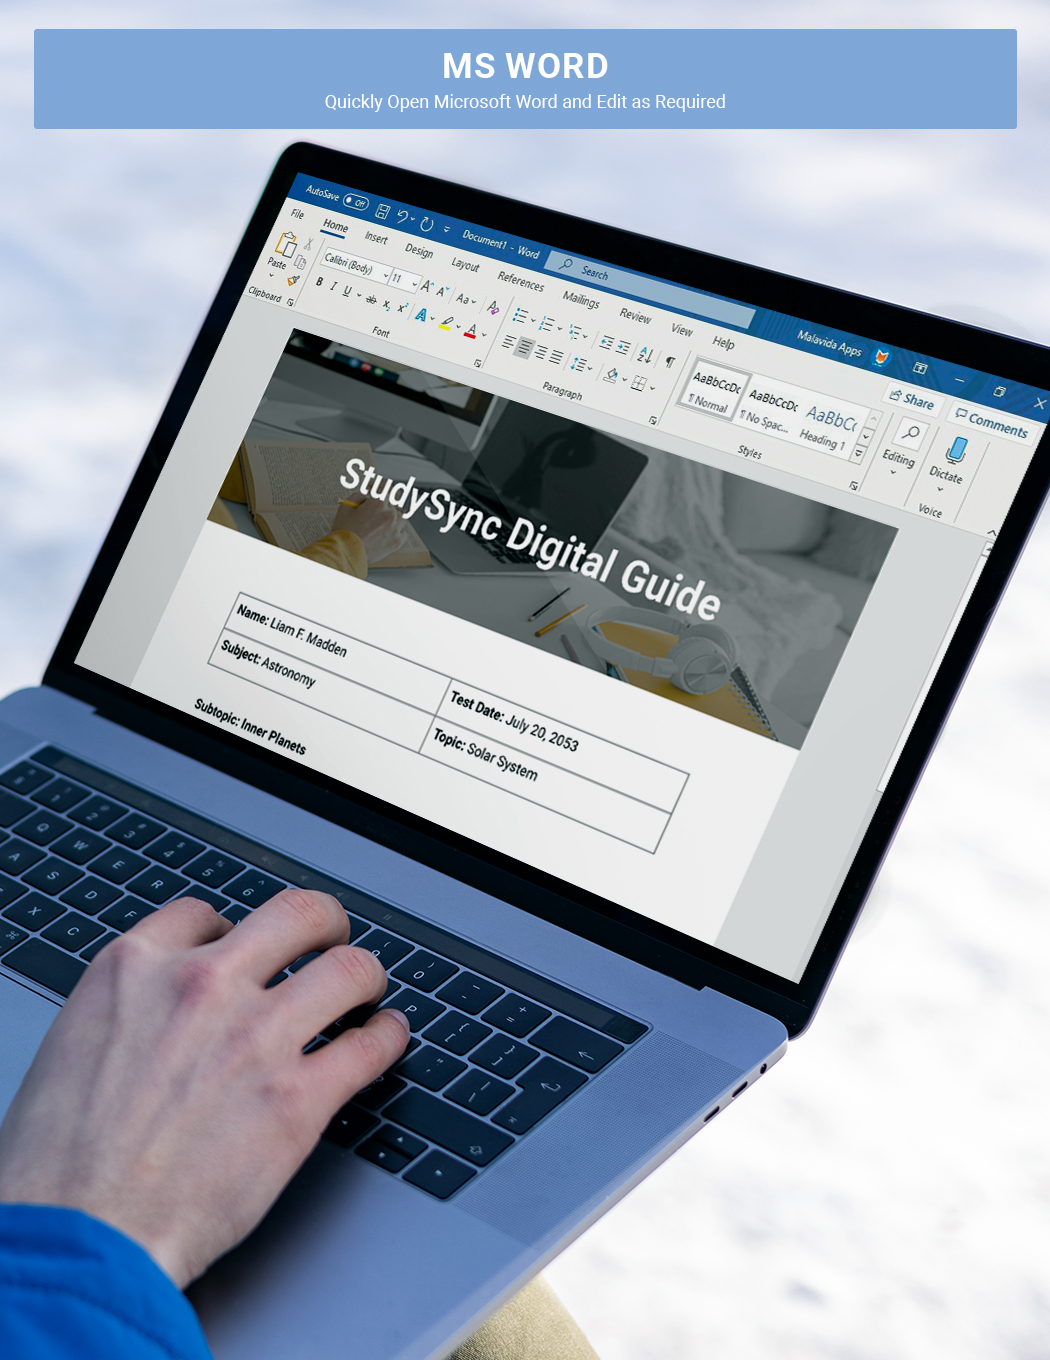 Study Sync Digital Guide Template